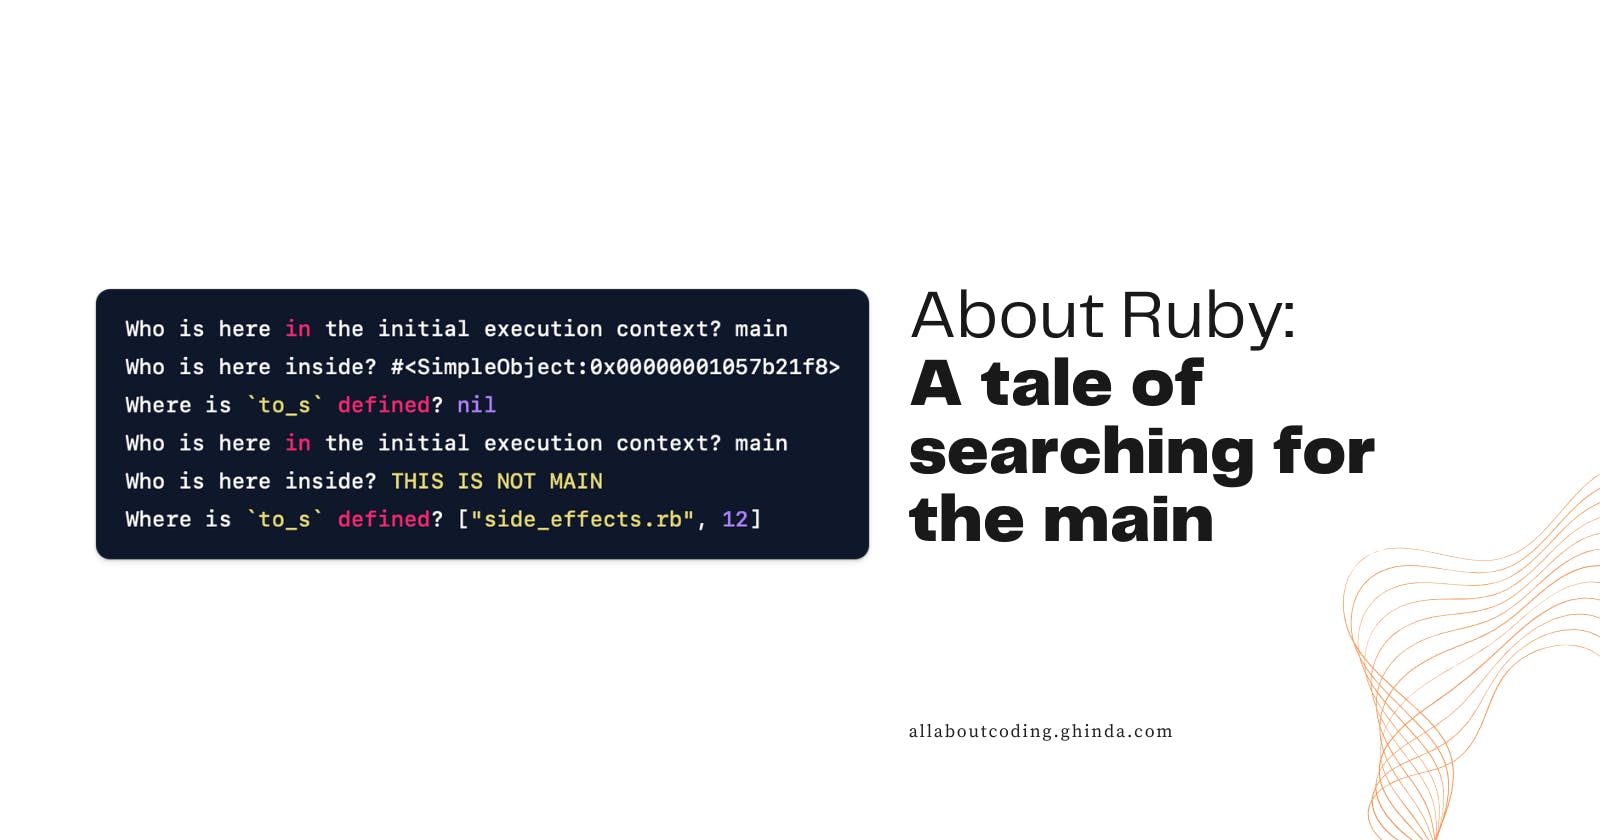 About Ruby: A tale of searching for the main